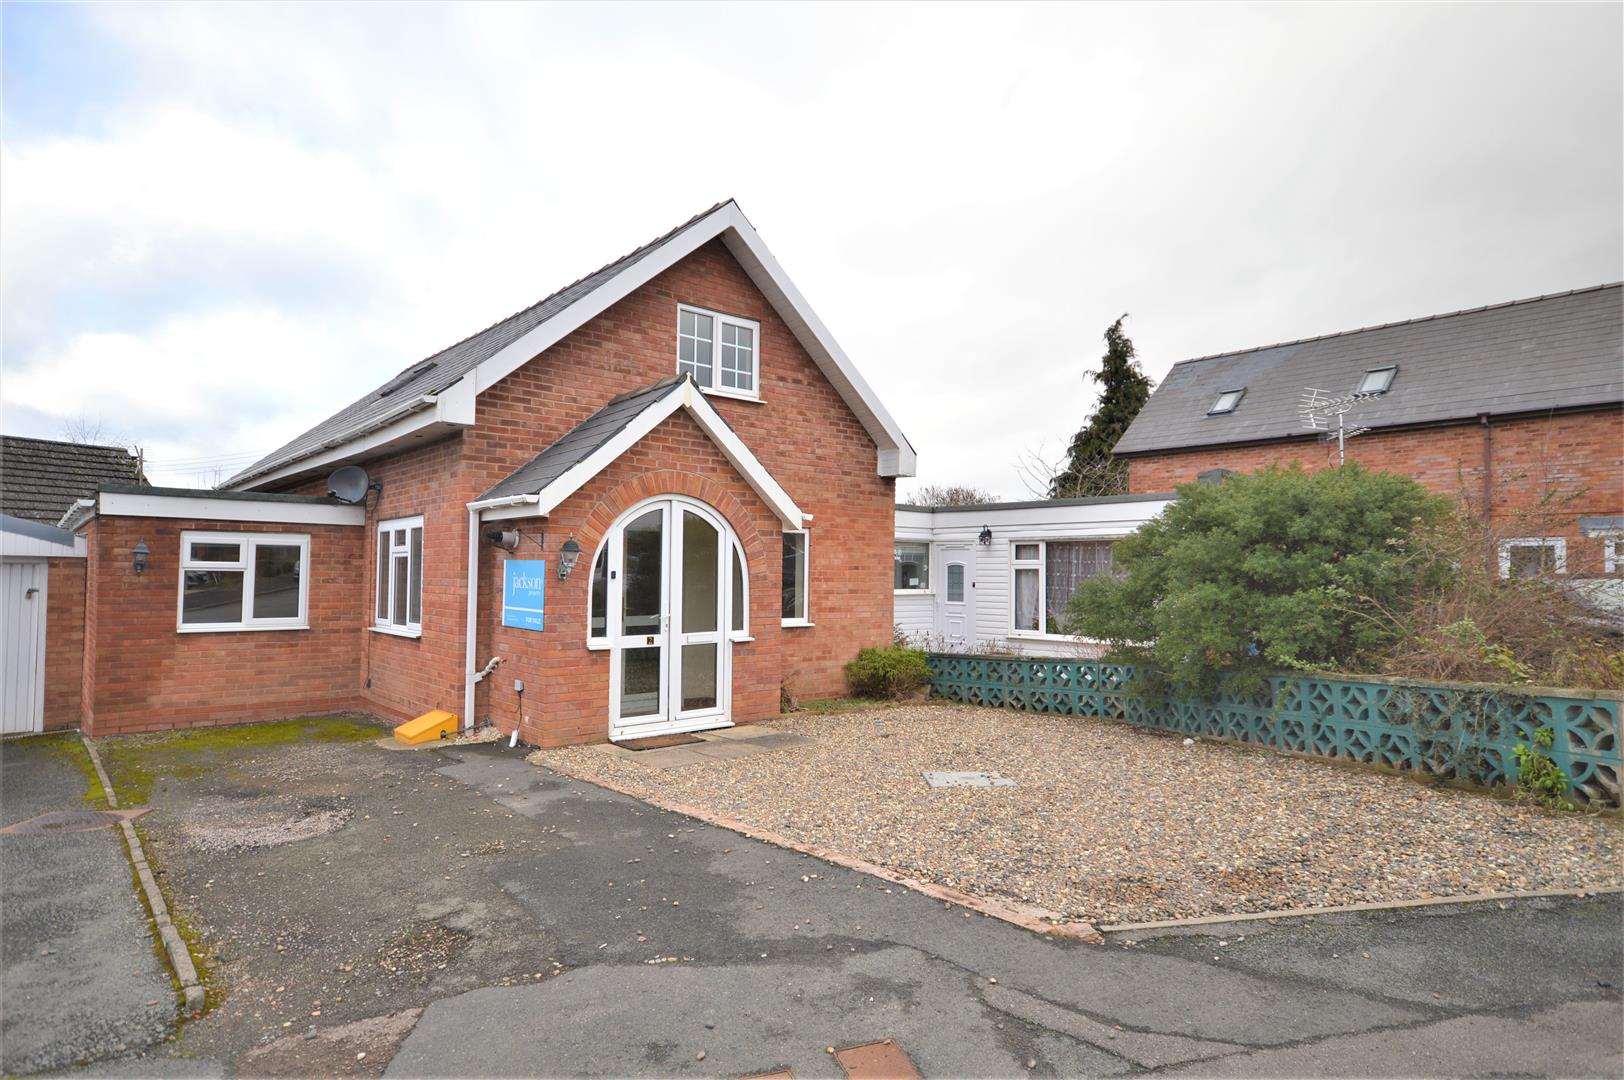 4 bed detached bungalow for sale in Marden, HR1